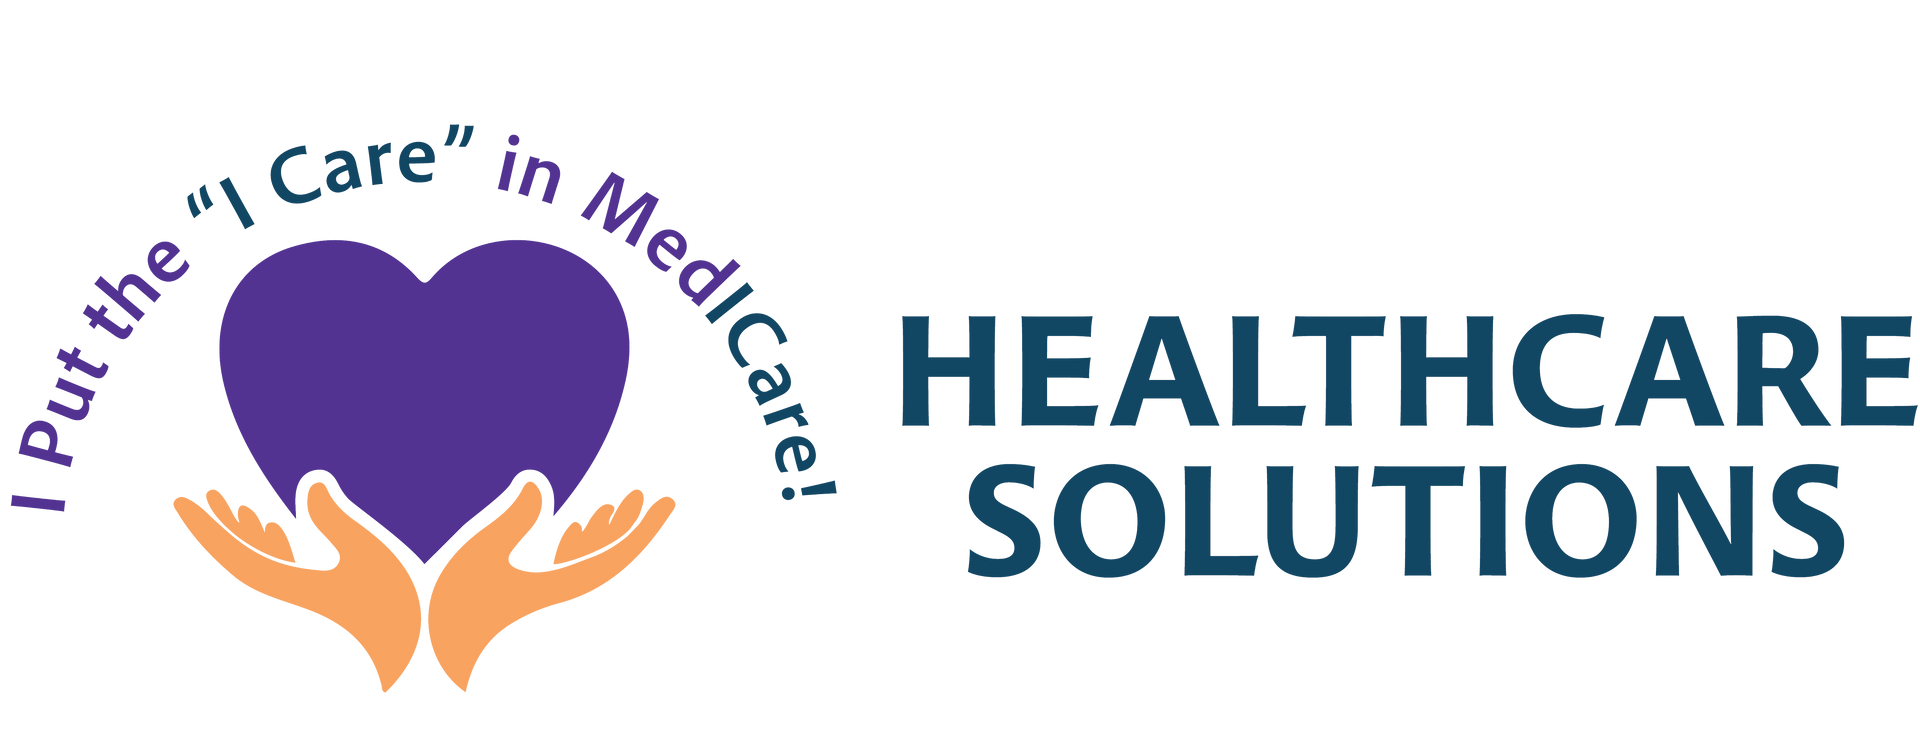 TChase Healthcare Solutions